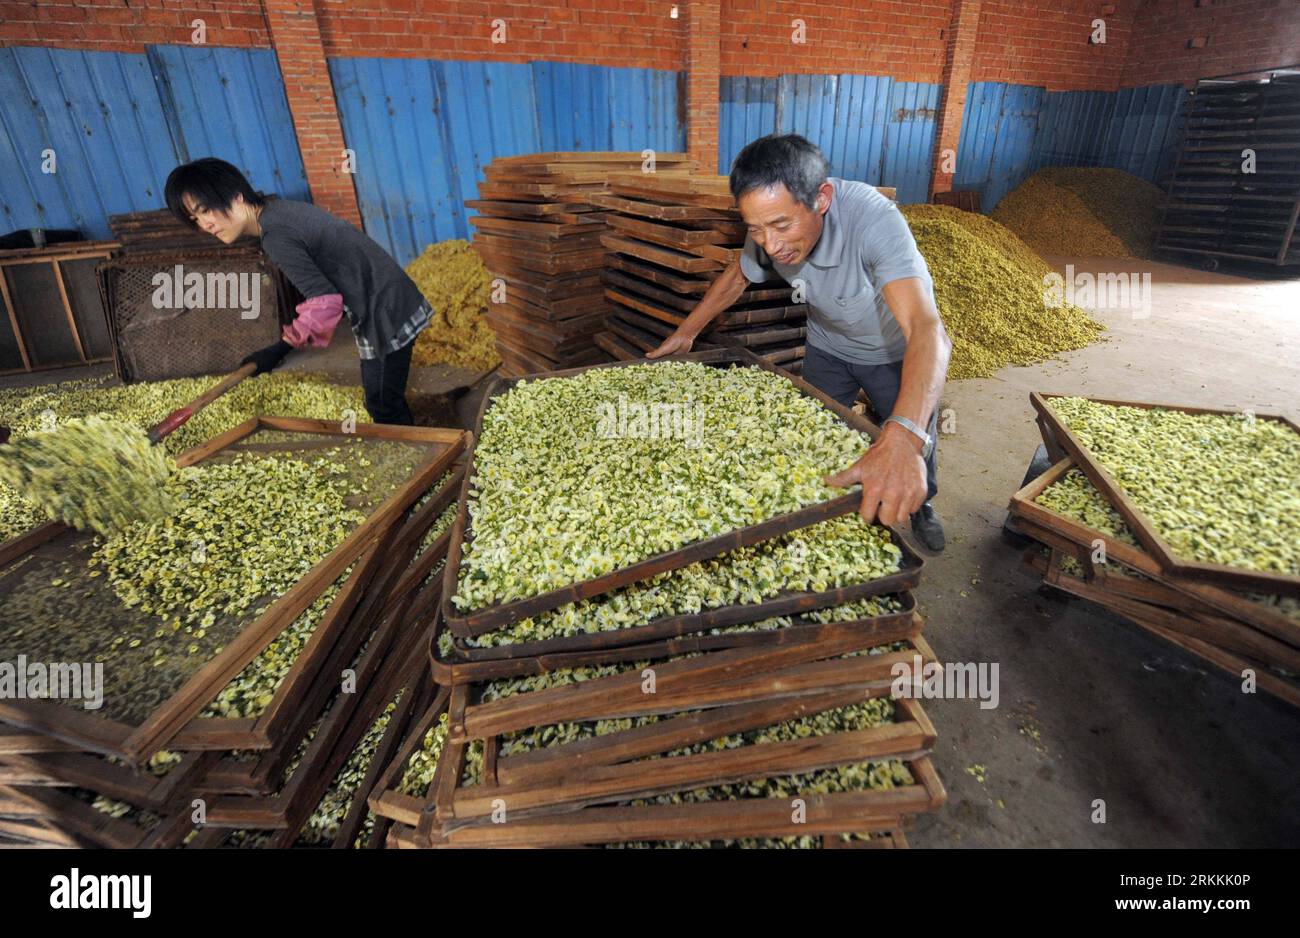 Bildnummer: 56251125  Datum: 05.11.2011  Copyright: imago/Xinhua (111105) -- TONGXIANG, Nov. 5, 2011 (Xinhua) -- Farmers sift chrysanthemums morifolium to make Chinese chrysanthemum tea, in Shimen Township of Tongxiang, east China s Zhejiang Province, Nov. 5, 2011. Tongxiang, with some 300-year history of planting chrysanthemums morifolium, is a famous sourceland of the traditional Chinese chrysanthemum tea. (Xinhua/Xu Yu) (zgp) CHINA-TONGXIANG-CHRYSANTHEMUMS MORIFOLIUM-HARVEST (CN) PUBLICATIONxNOTxINxCHN Wirtschaft Landwirtschaft Ernte Teeernte Tee Chrysanthemen Chrysanthementee Fotostory xns Stock Photo